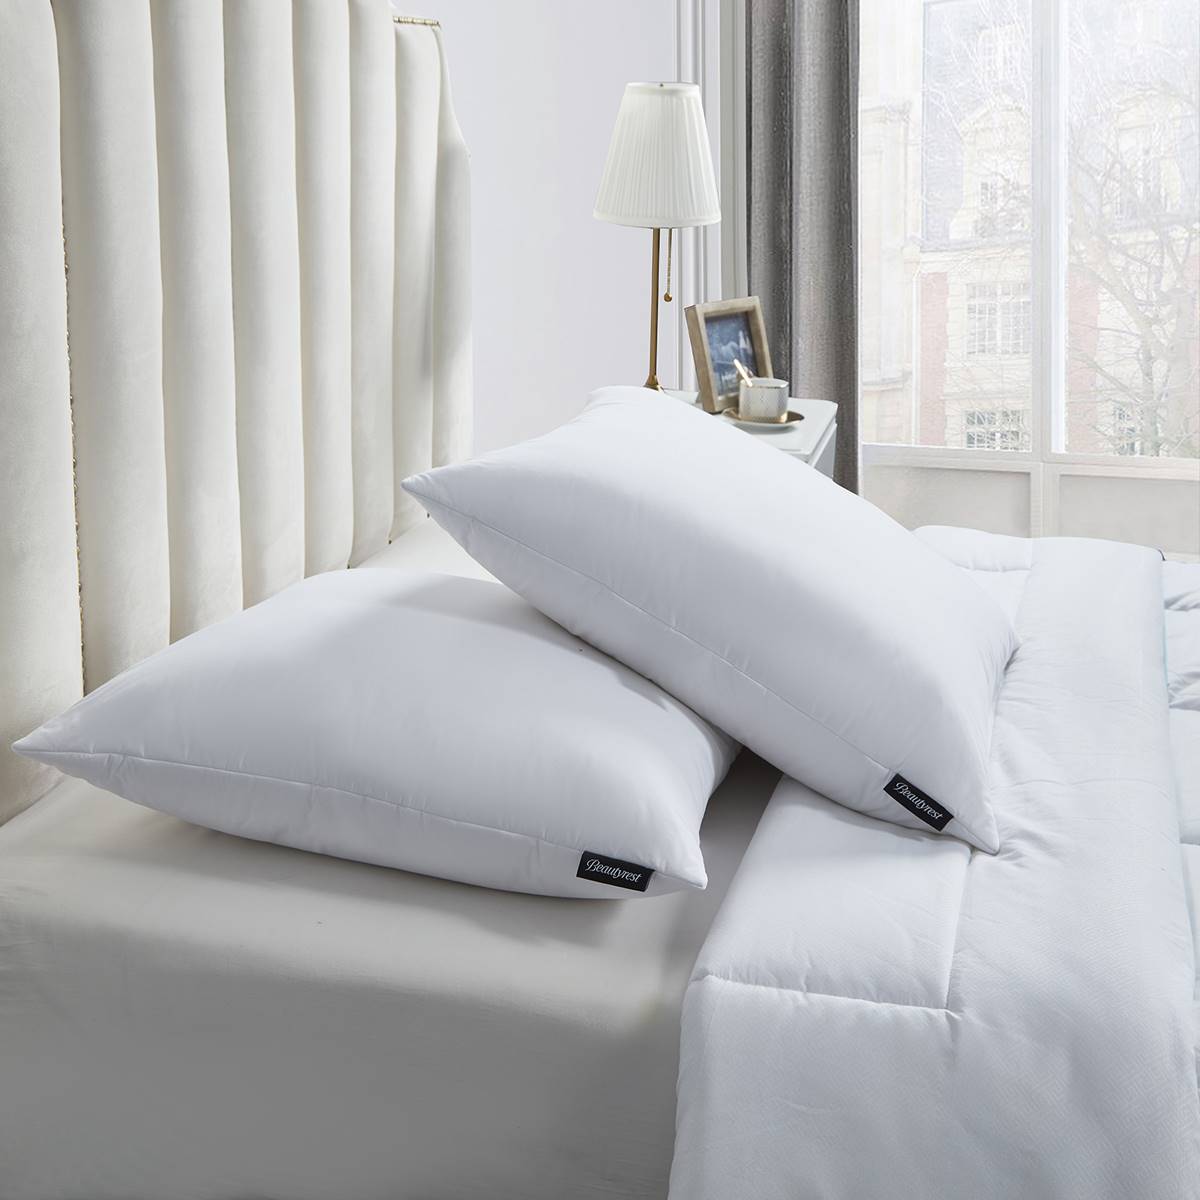 Beautyrest(R) Firm 233TC 2pk. Feather And Down Euro Pillow